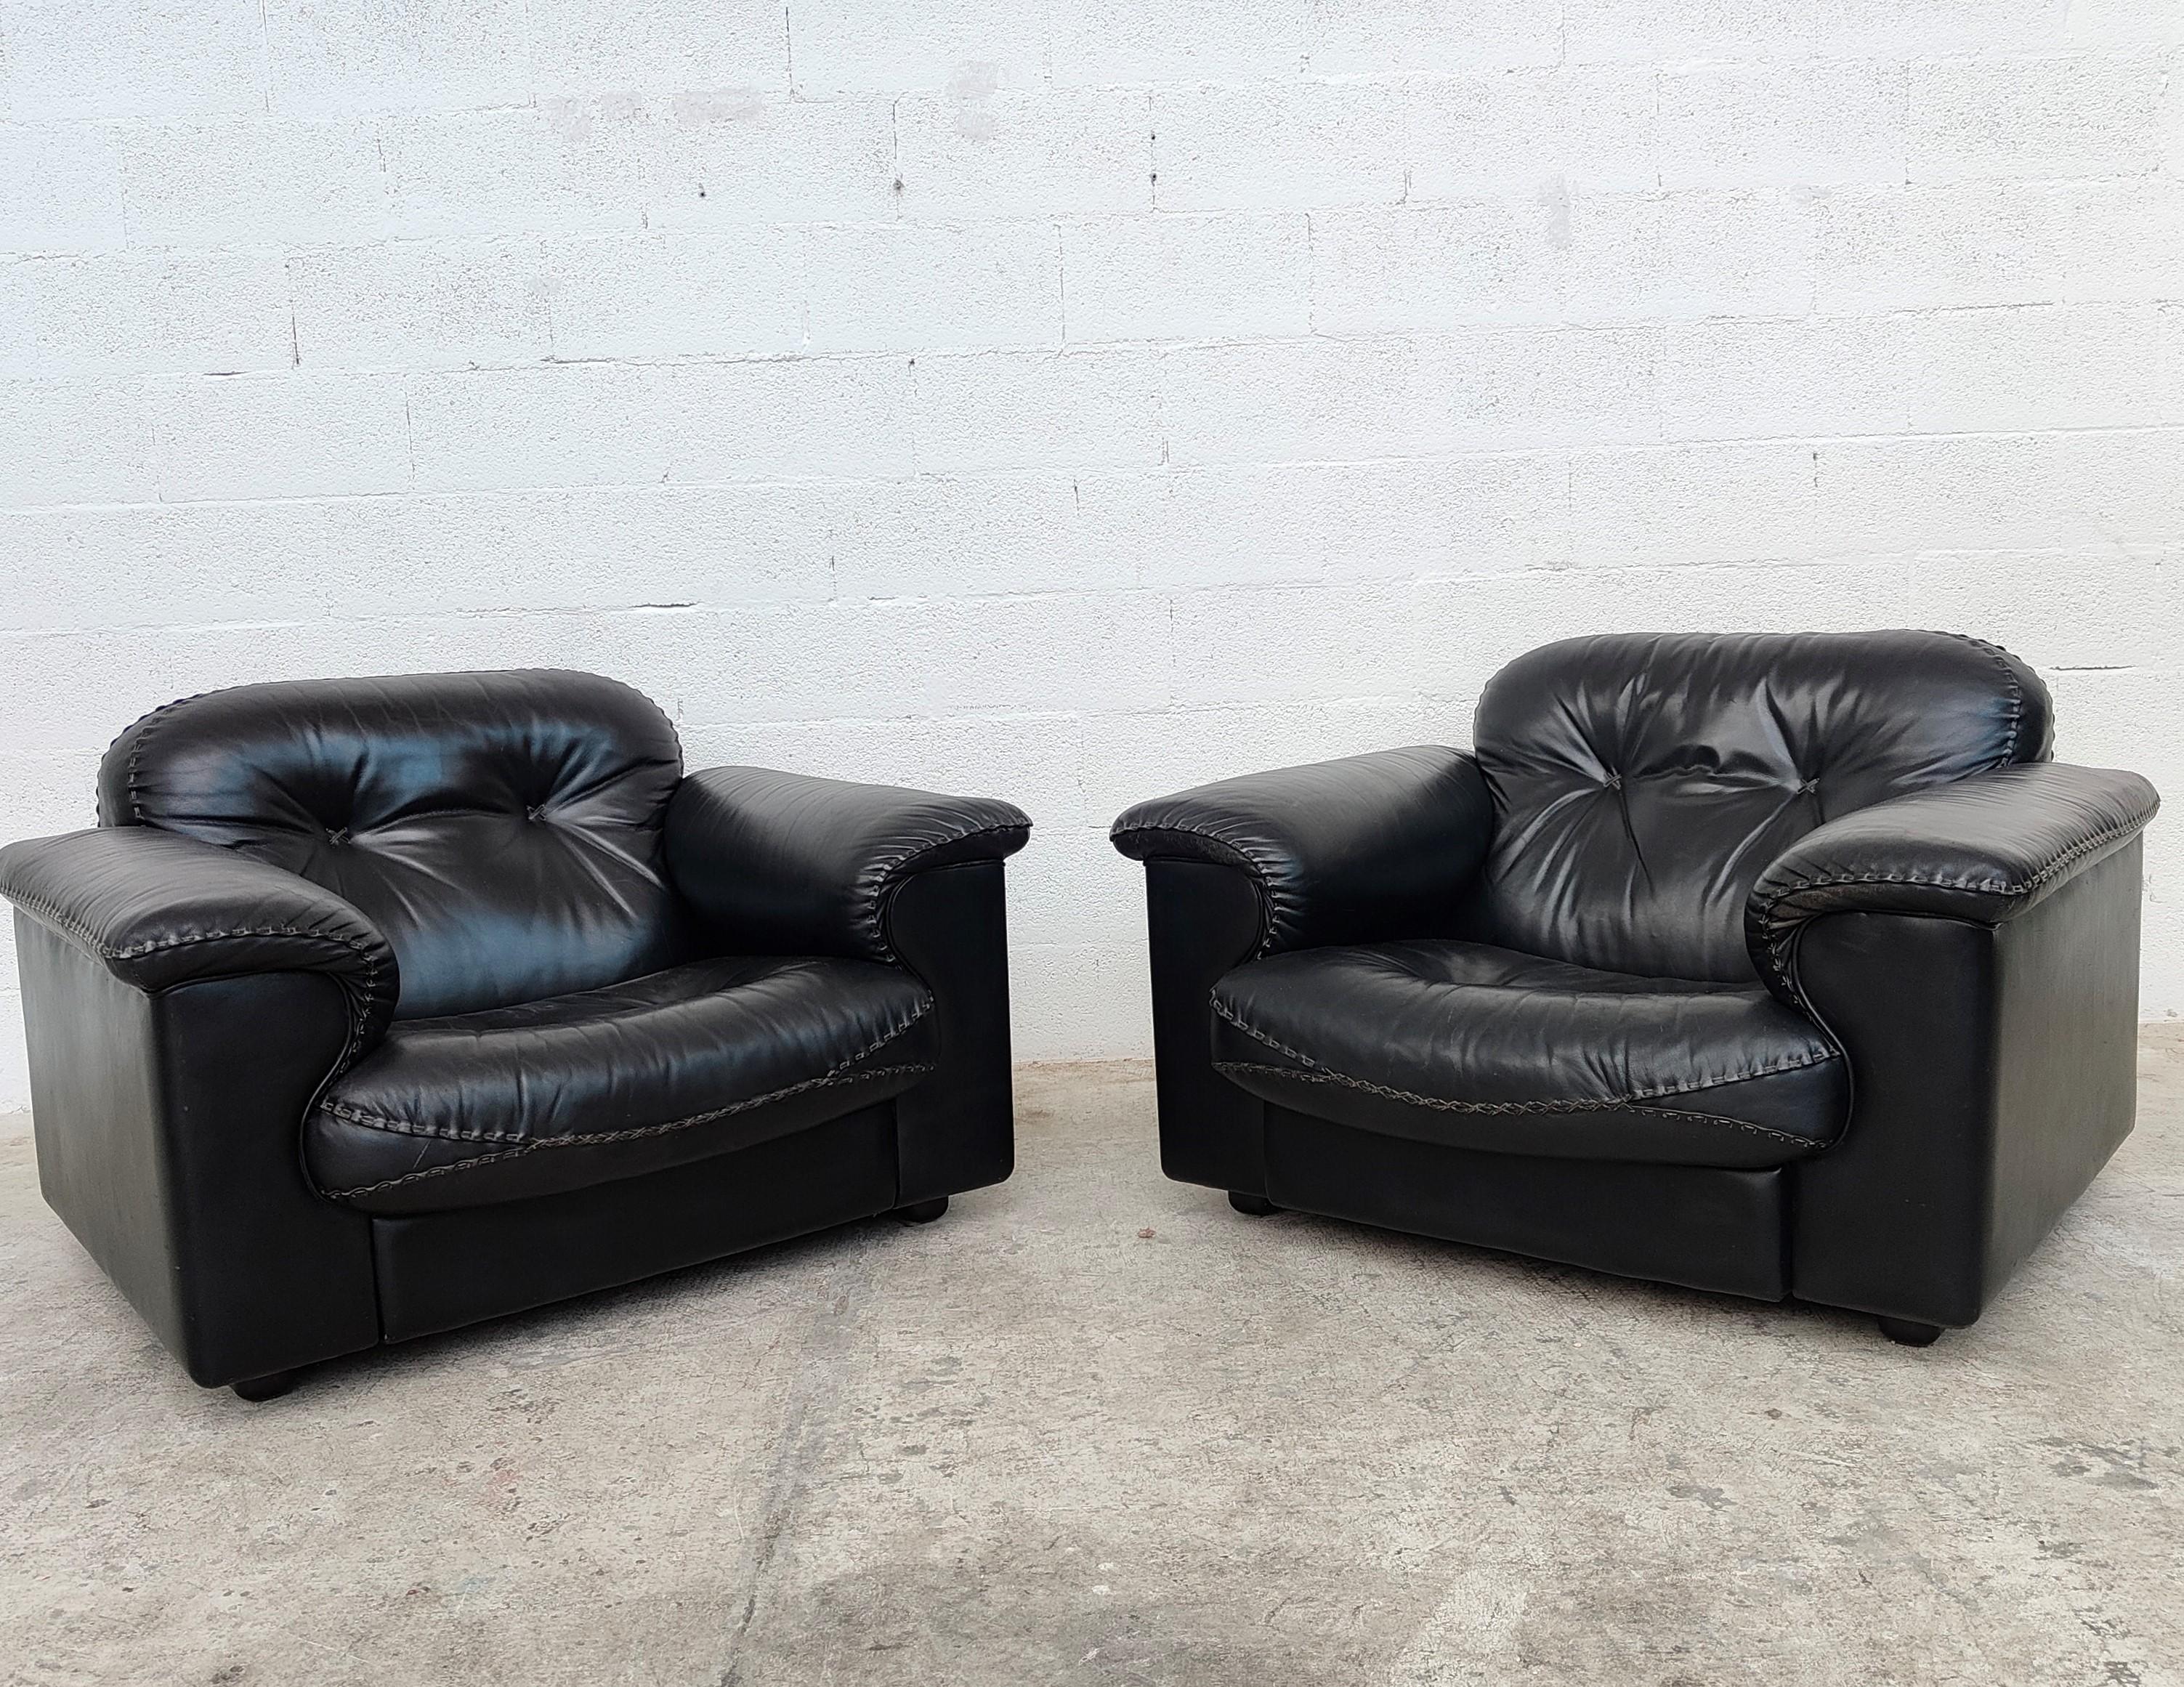 Late 20th Century Pair of Adjustable De Sede Black Leather Armchairs DS-101 Model 70s